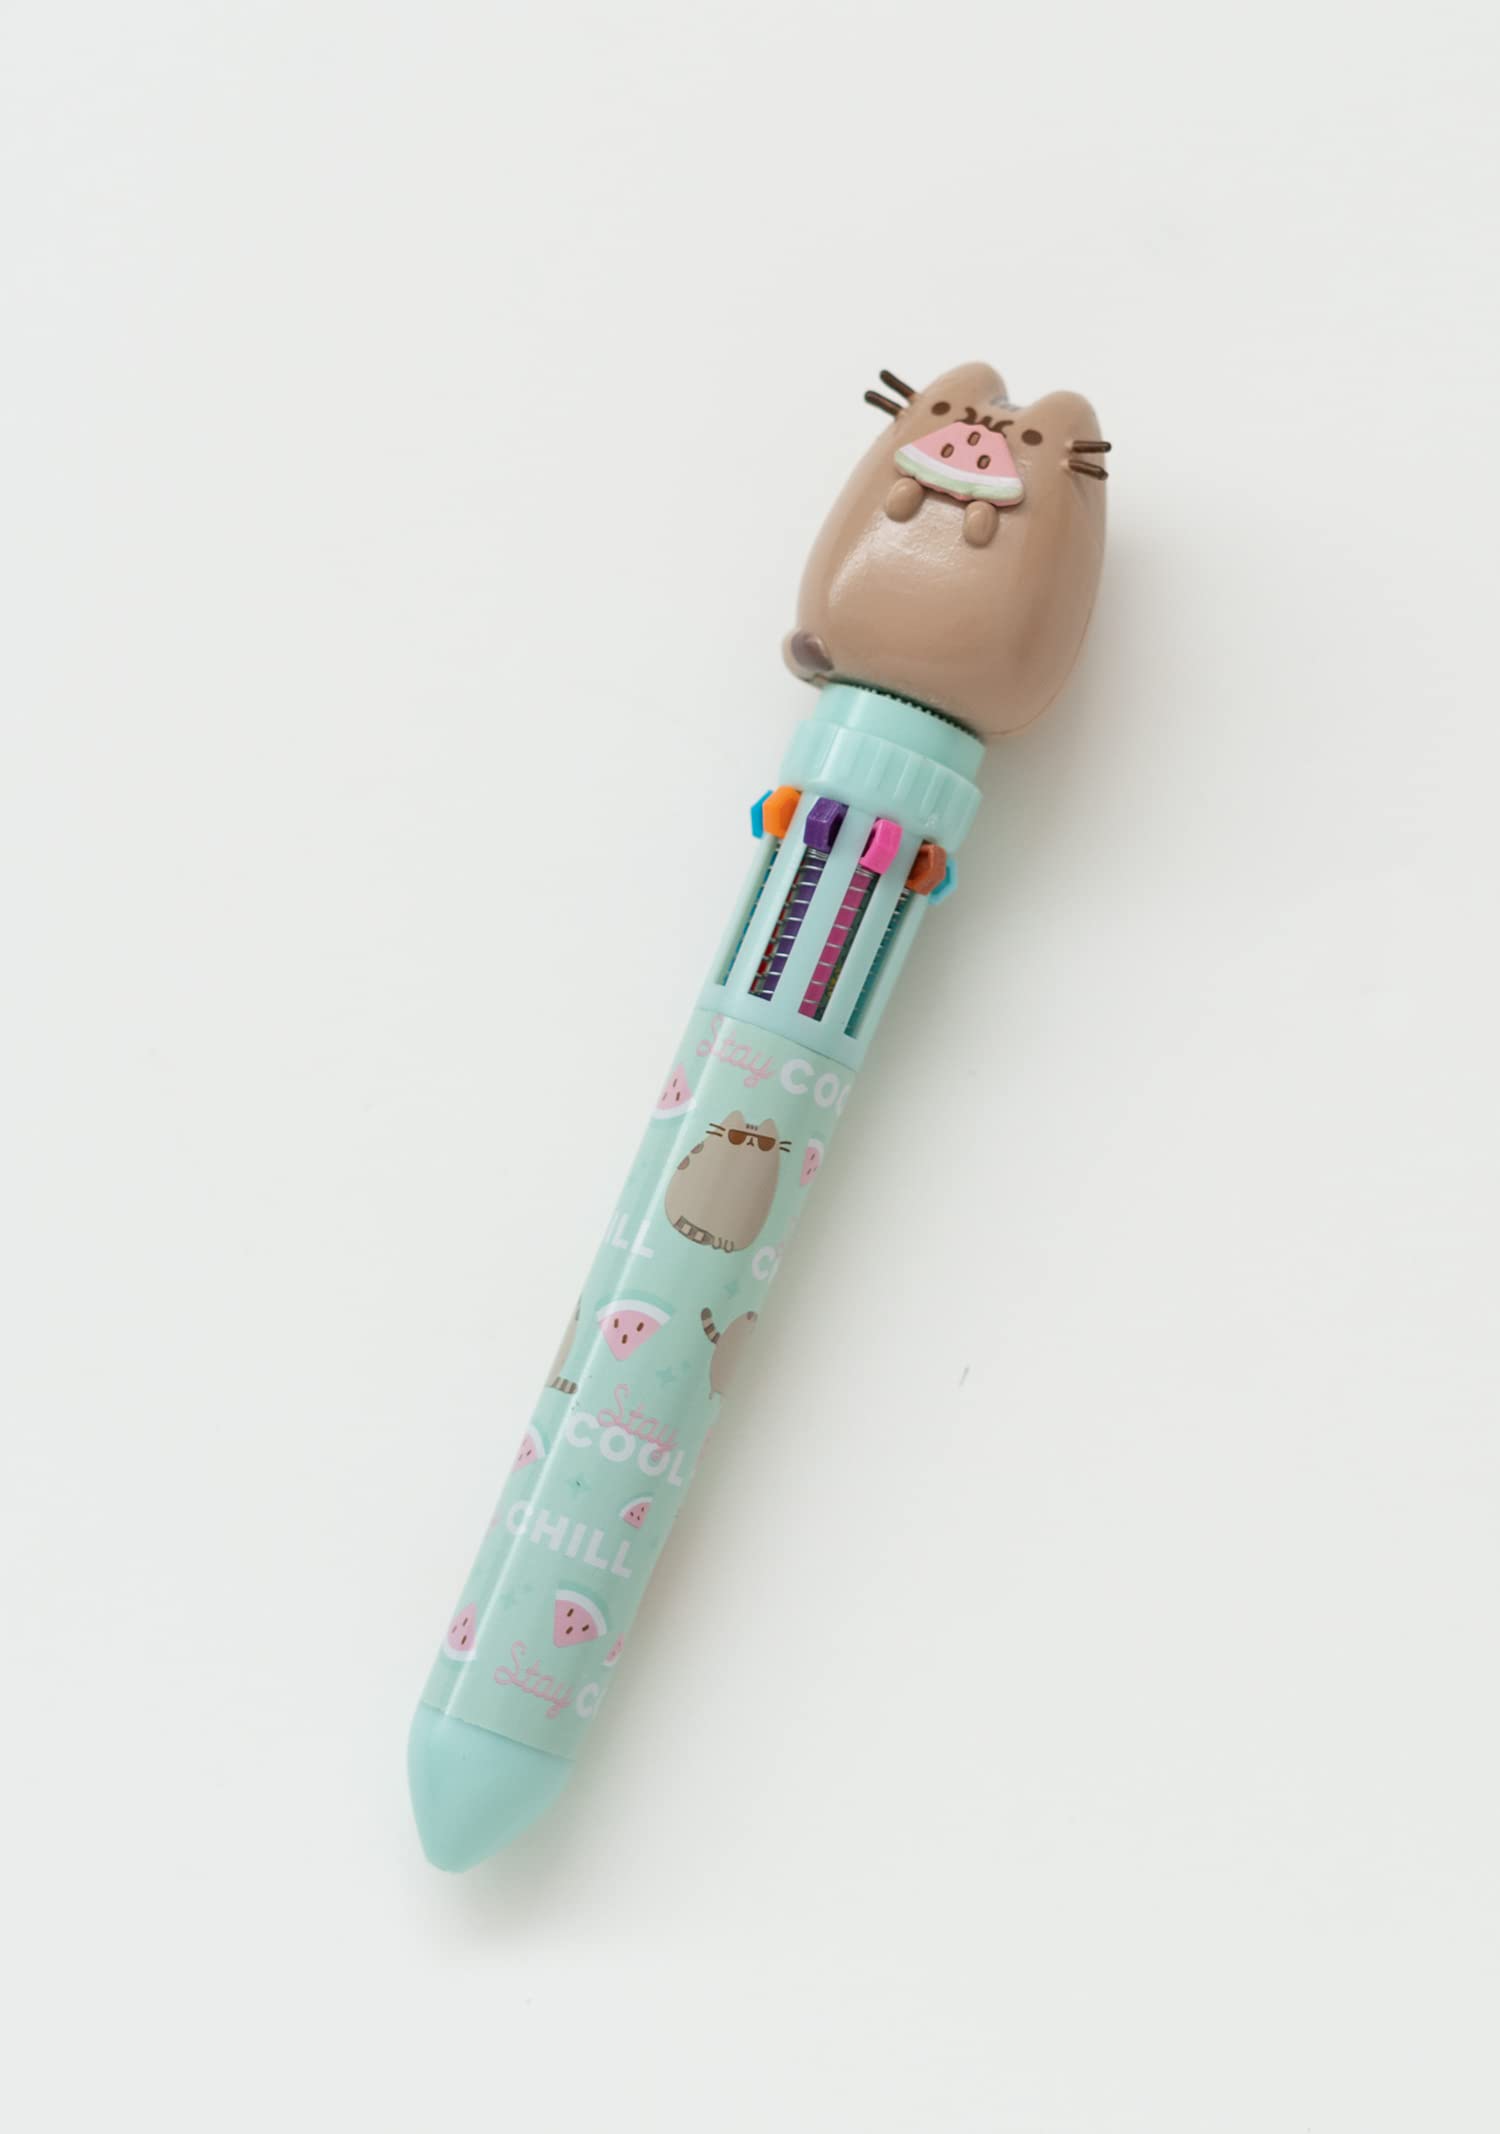 Pusheen Stationery Set - Pusheen Pencil Case with Pen, Highlighter Set, Self Adhesive Notes, Paper Clips - Pusheen Foodie Collection